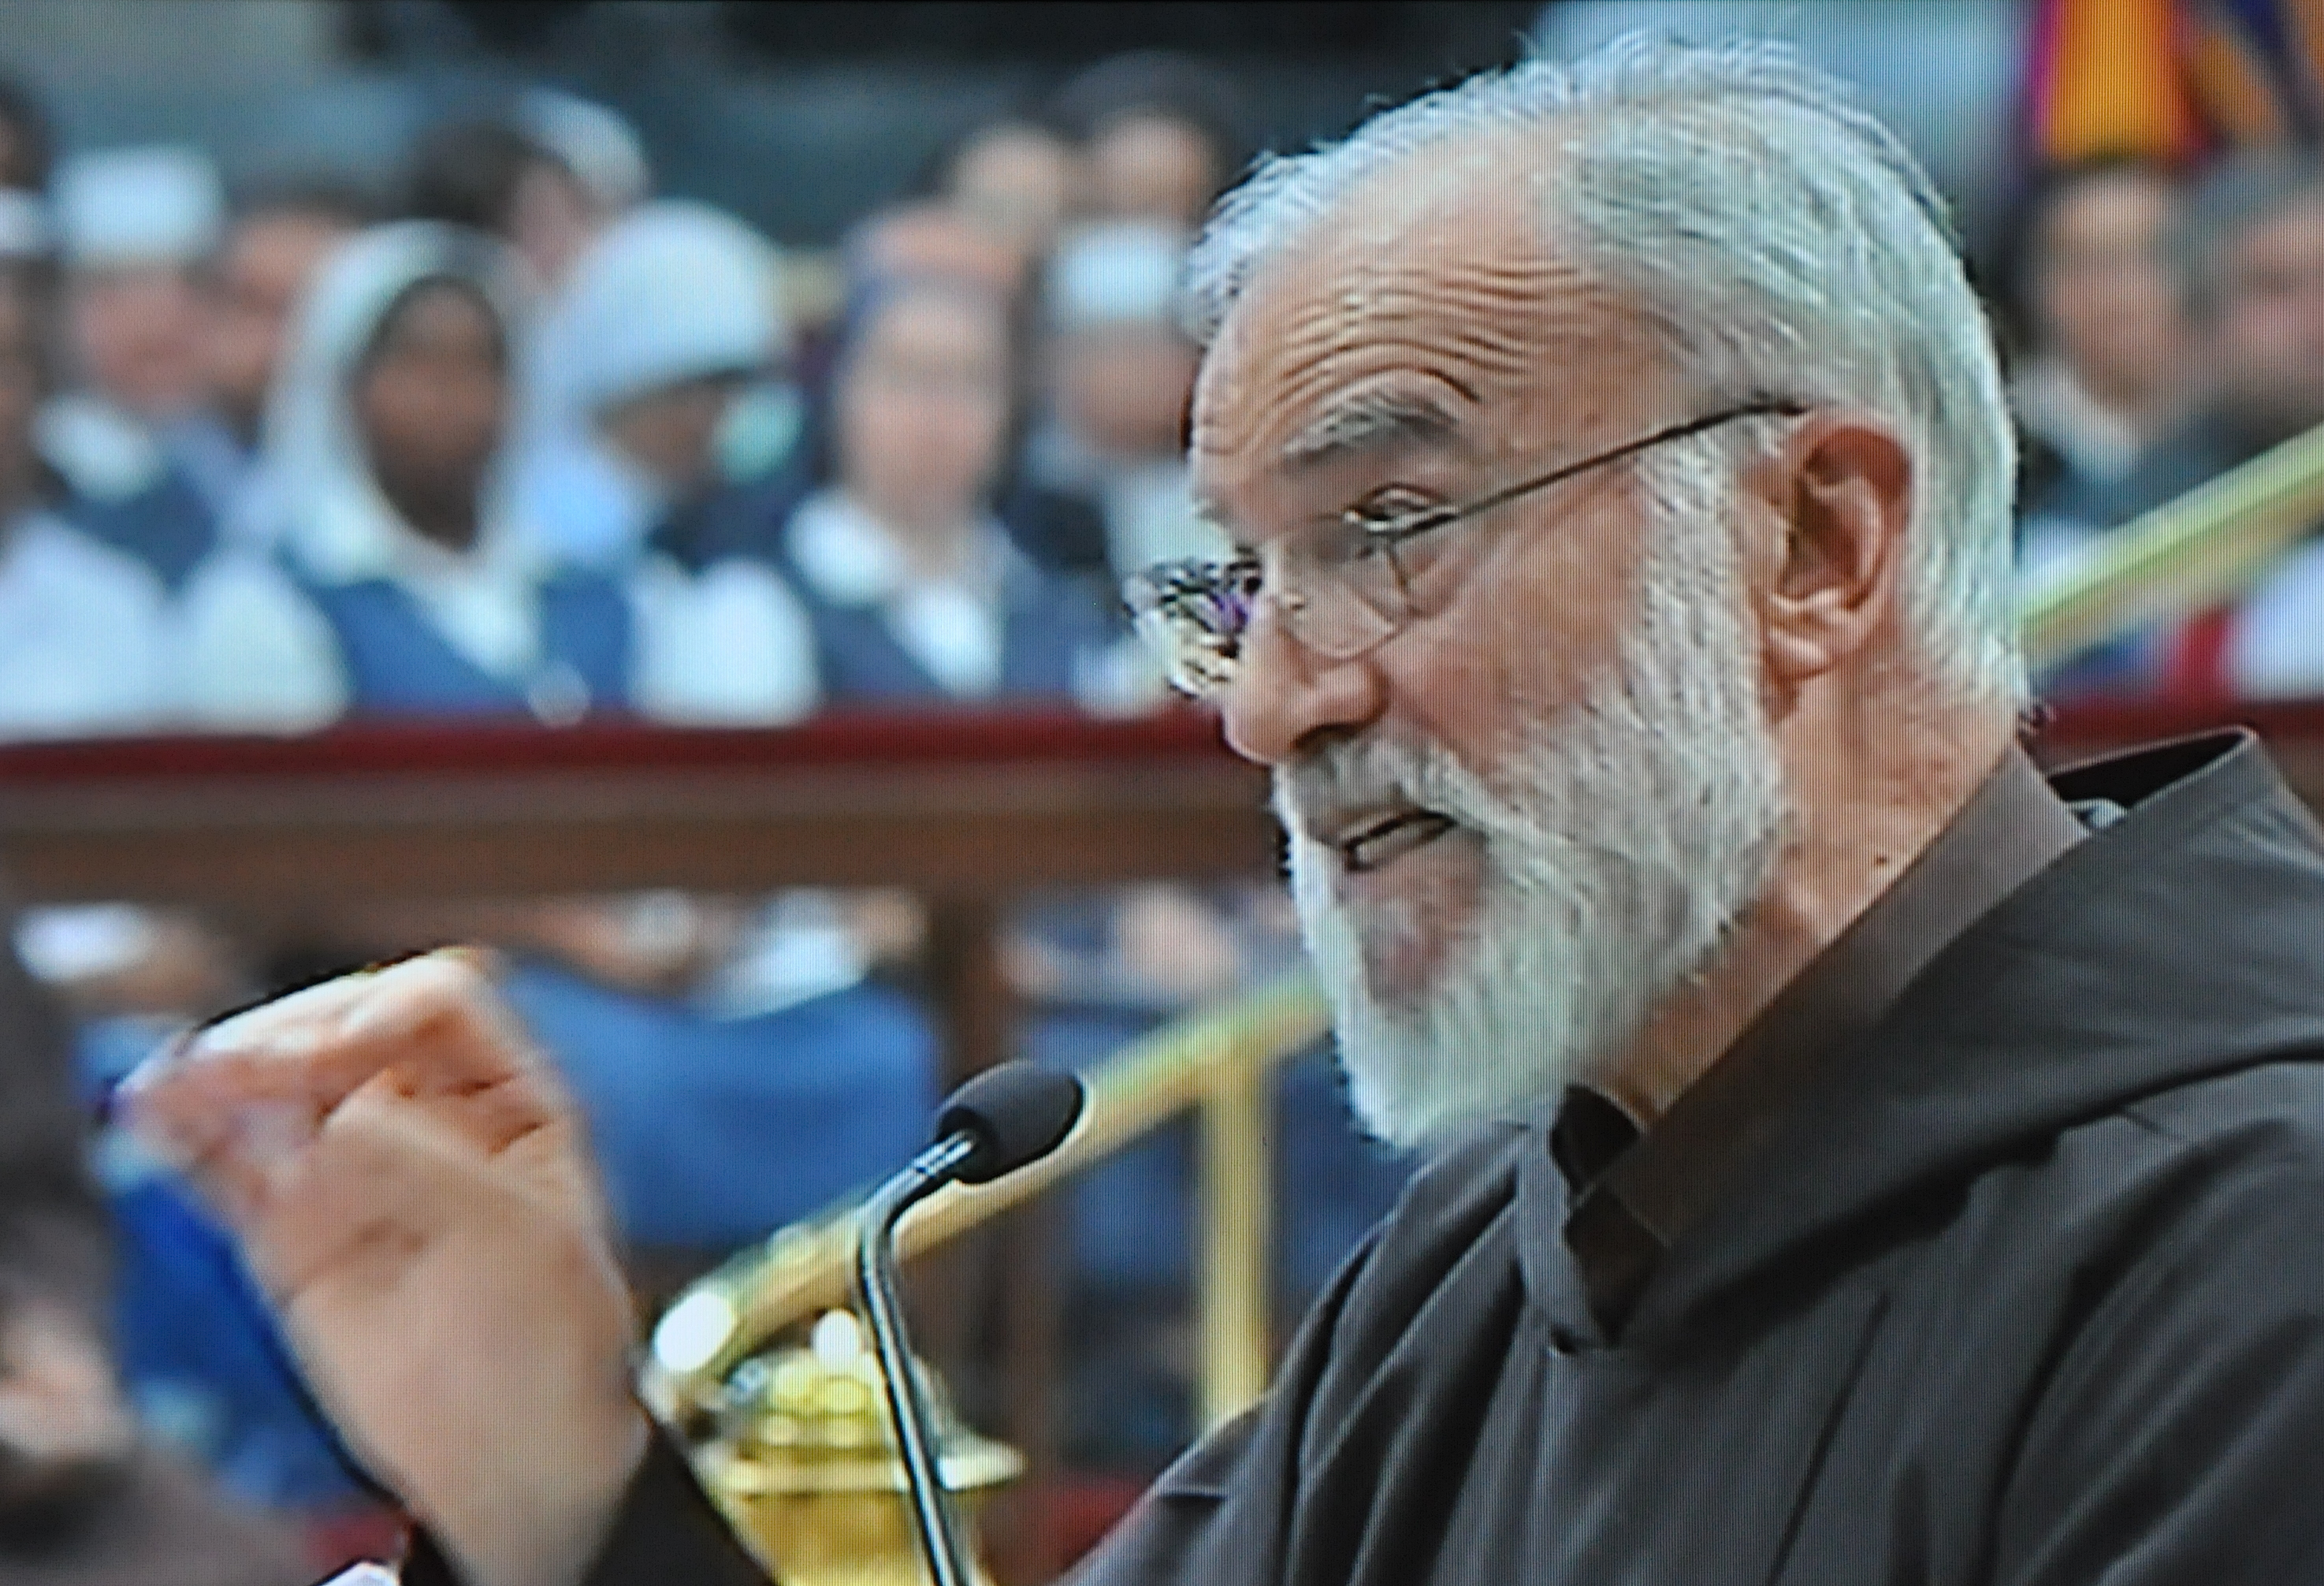 Raniero Cantalamessa in the predication of the Day to pray for the care of creation